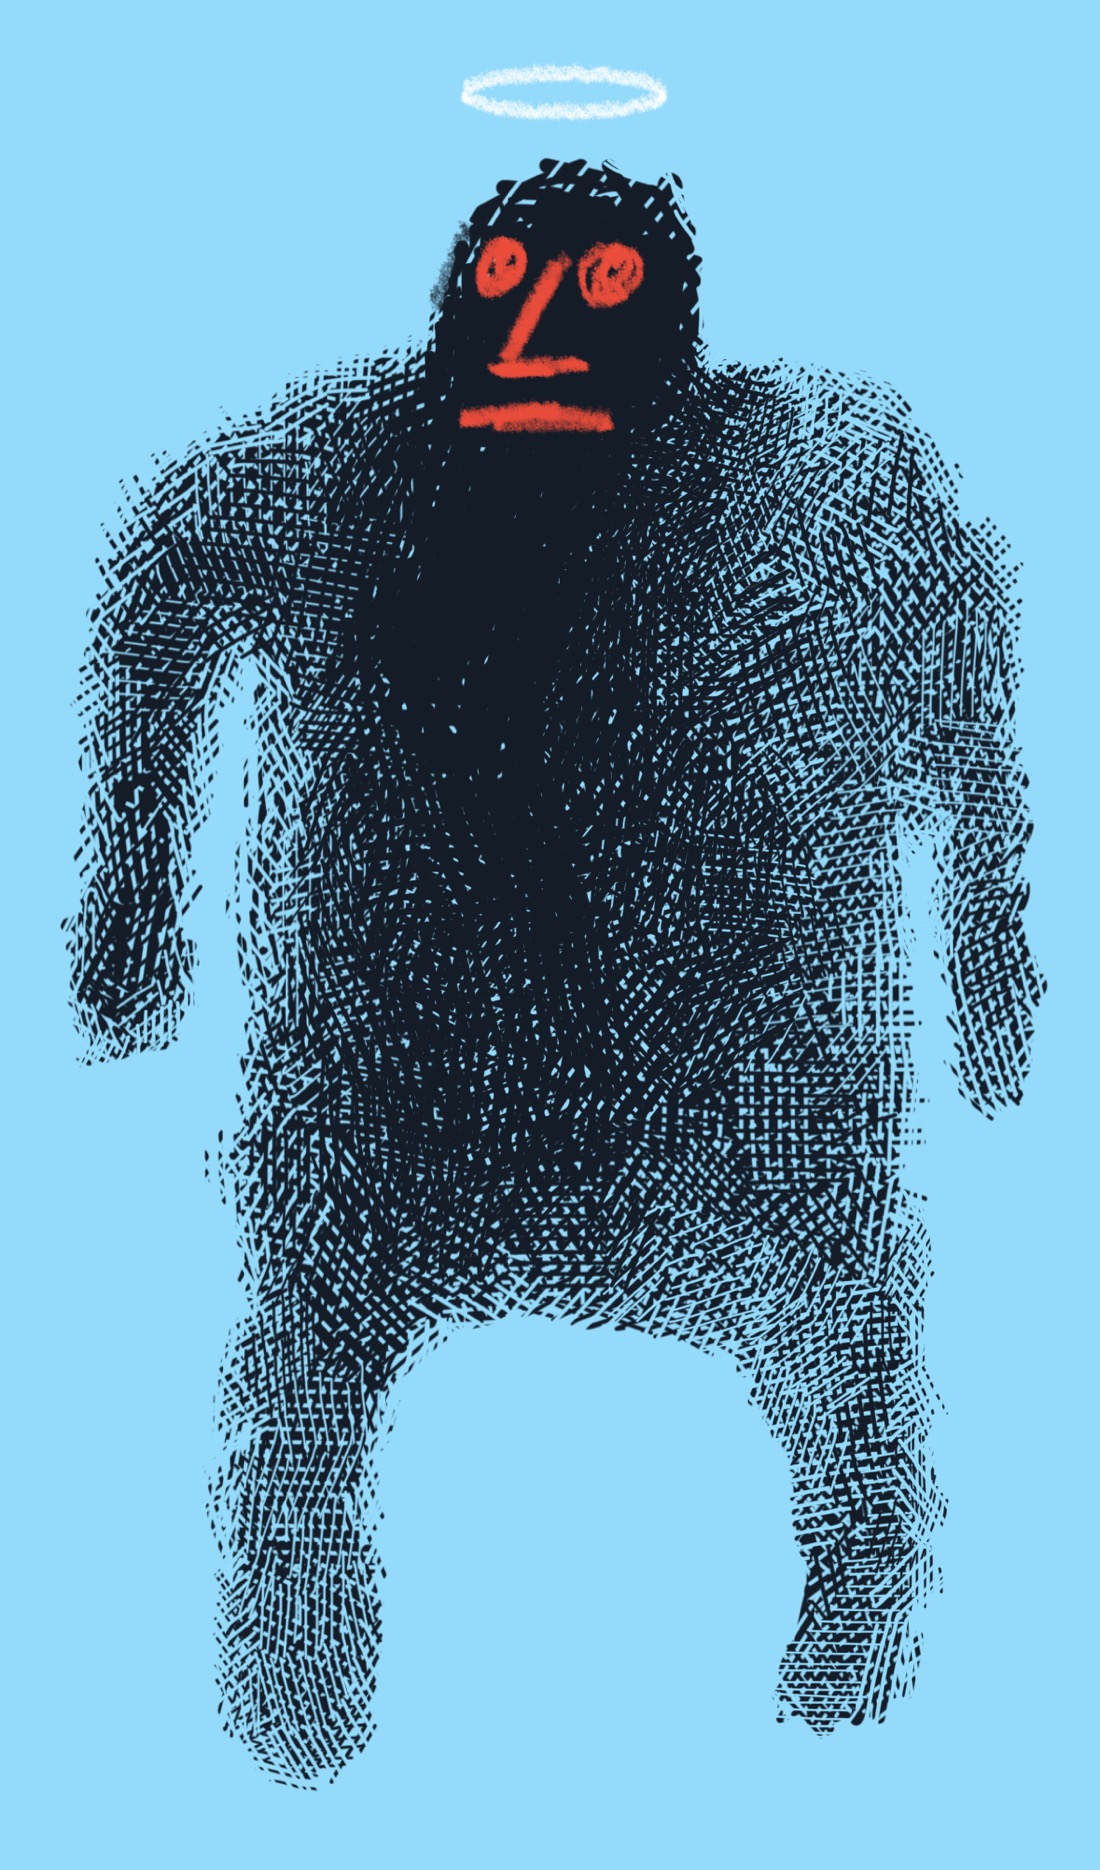 A humanoid figure, the edges rough and hazy, as though it's in the process of fading out. The head and chest area are the most solid. The face looks like it was crudely drawn with a red crayon. There's a white halo, also drawn in crayon, over its head.